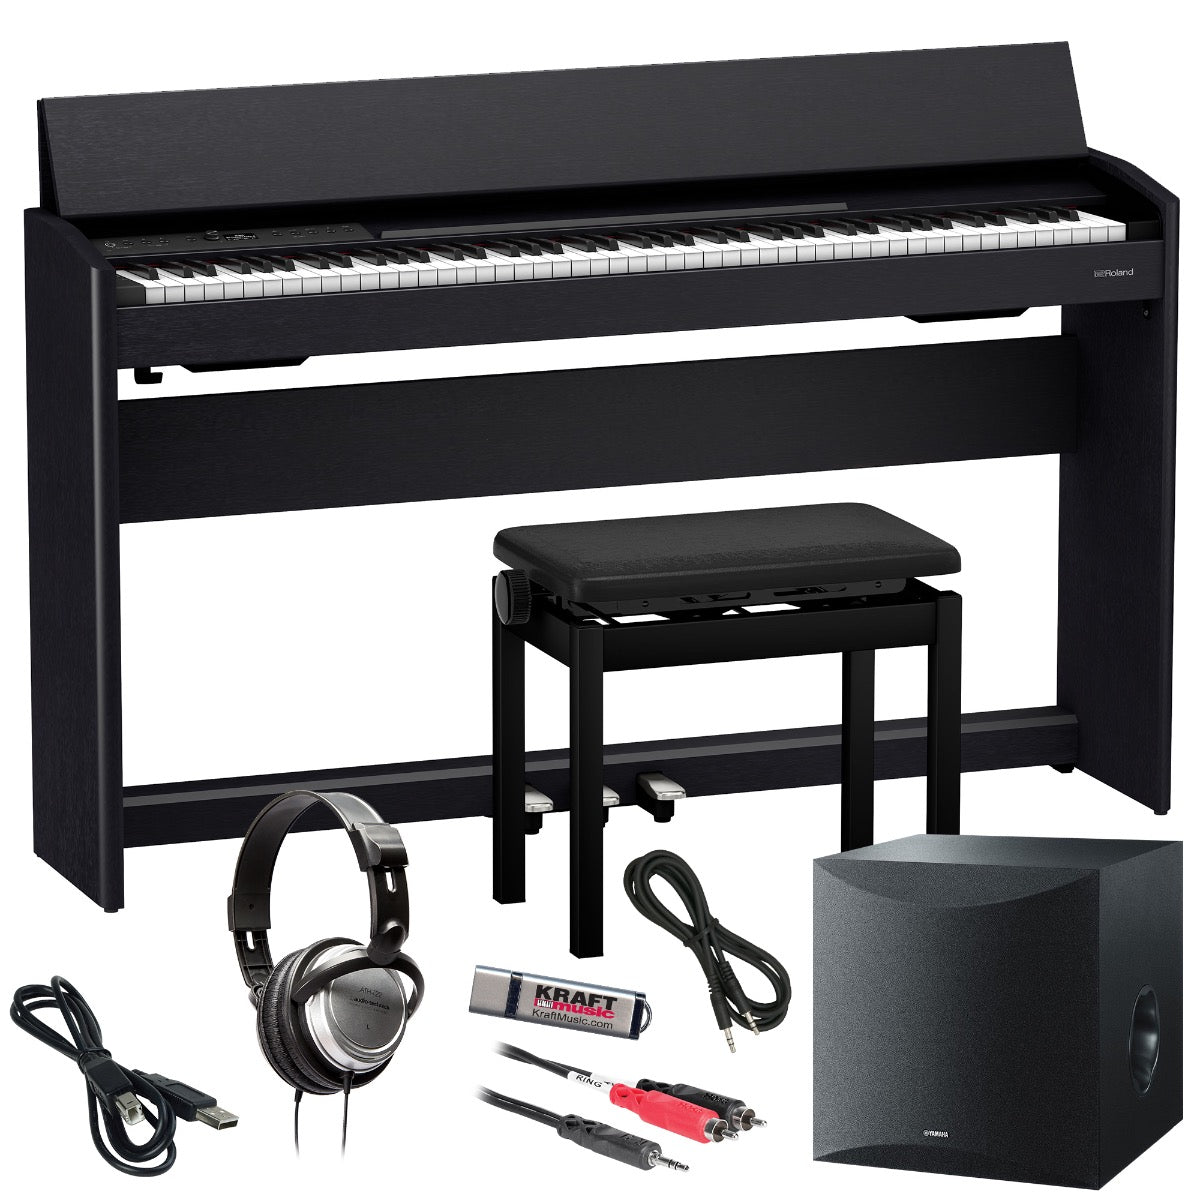 Roland F-140R Digital Piano (Black) Inc Stand, Headphones and Bench